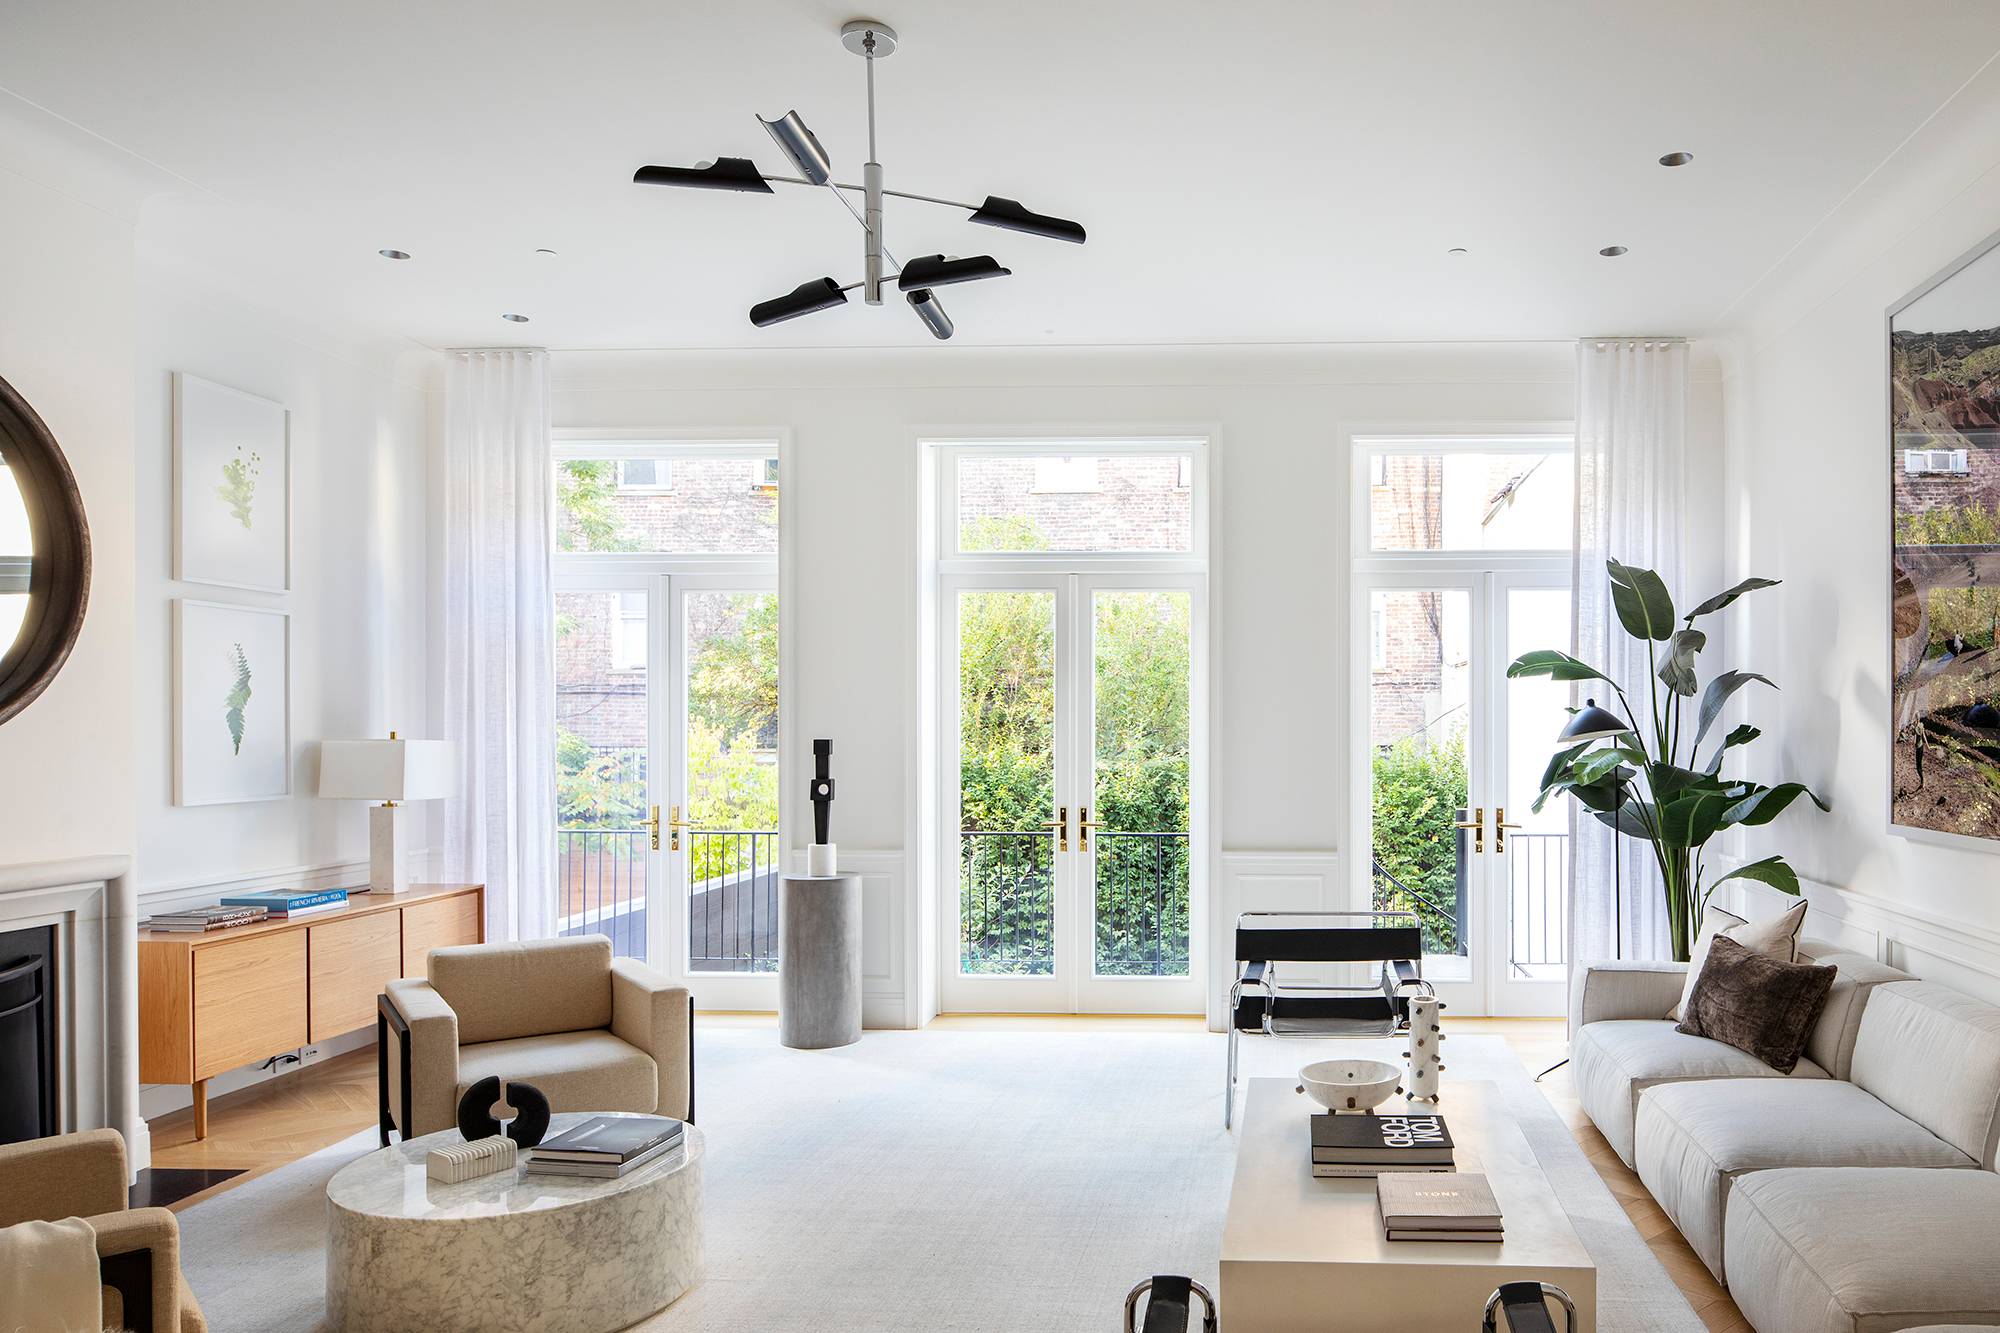 An icon reimagined situated within the Chelsea Historic District, 334 West 20th Street has been transformed following a years long, painstaking renovation designed by renowned AD100 firm Gachot and meticulously ...